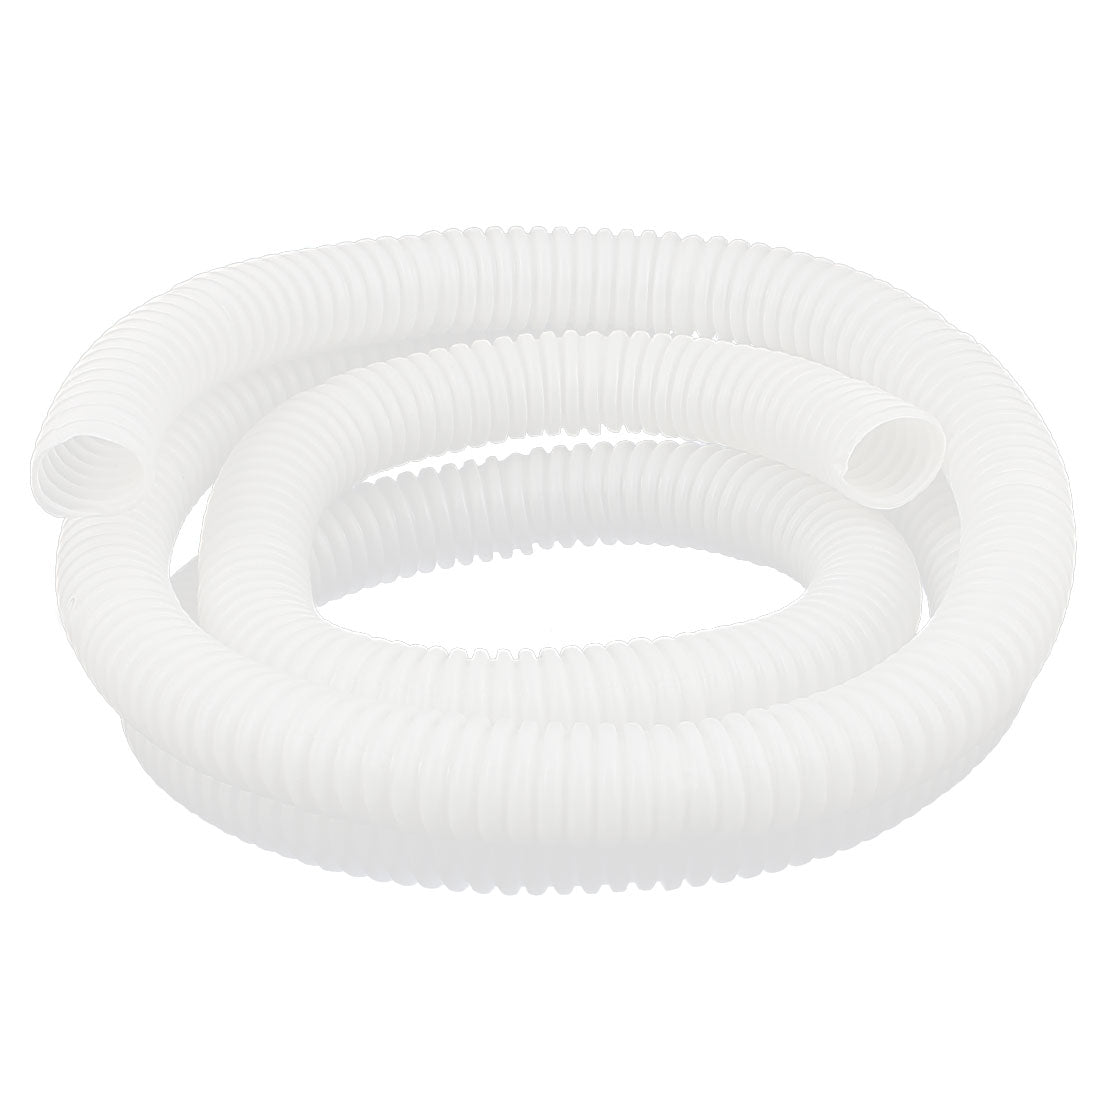 uxcell Uxcell 1.5 M 16 x 19 mm Plastic Corrugated Conduit Tube for Garden,Office White